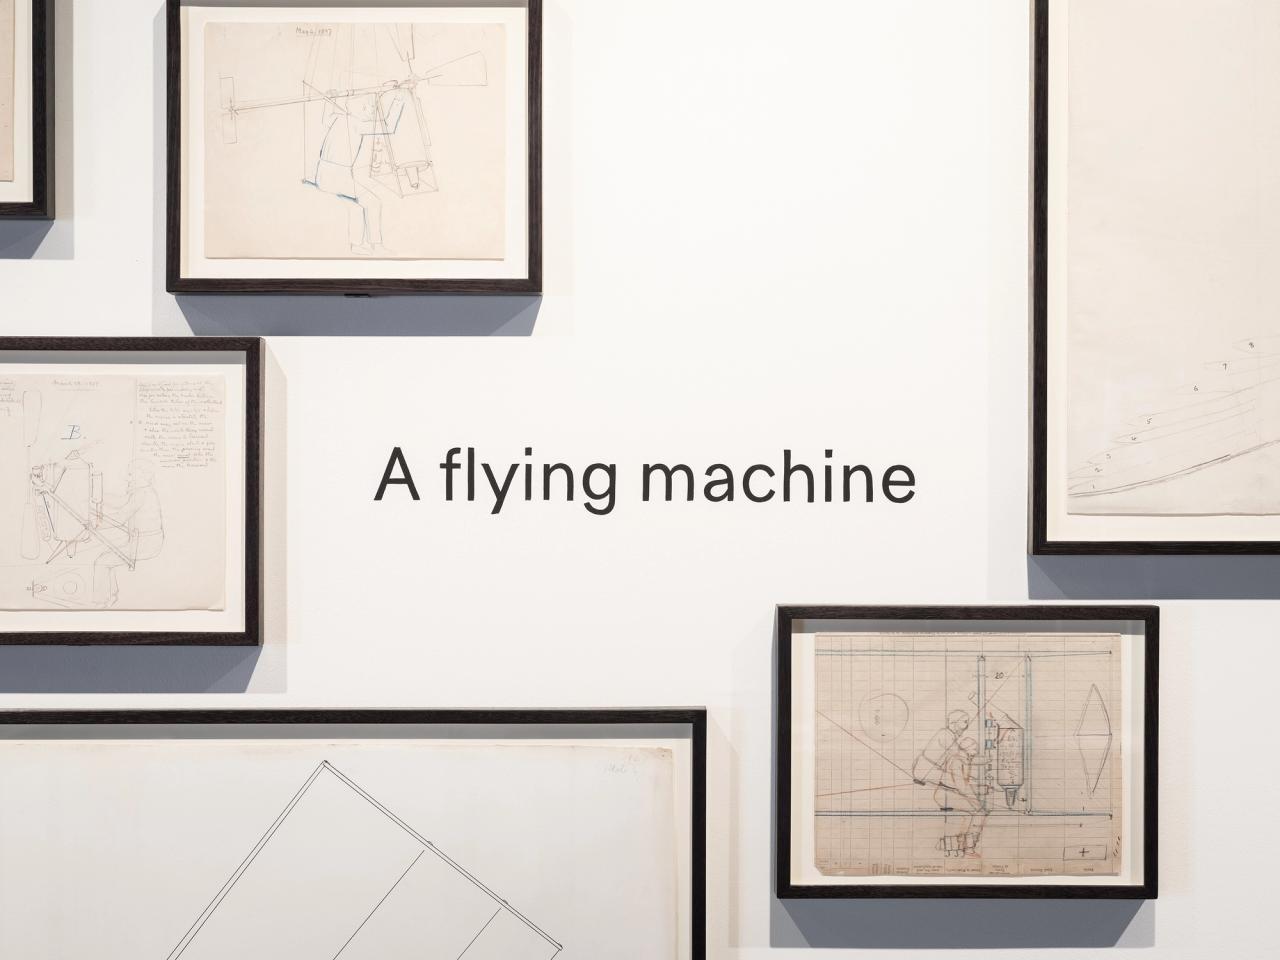 A wall of framed drawings surround the phrase A flying machine